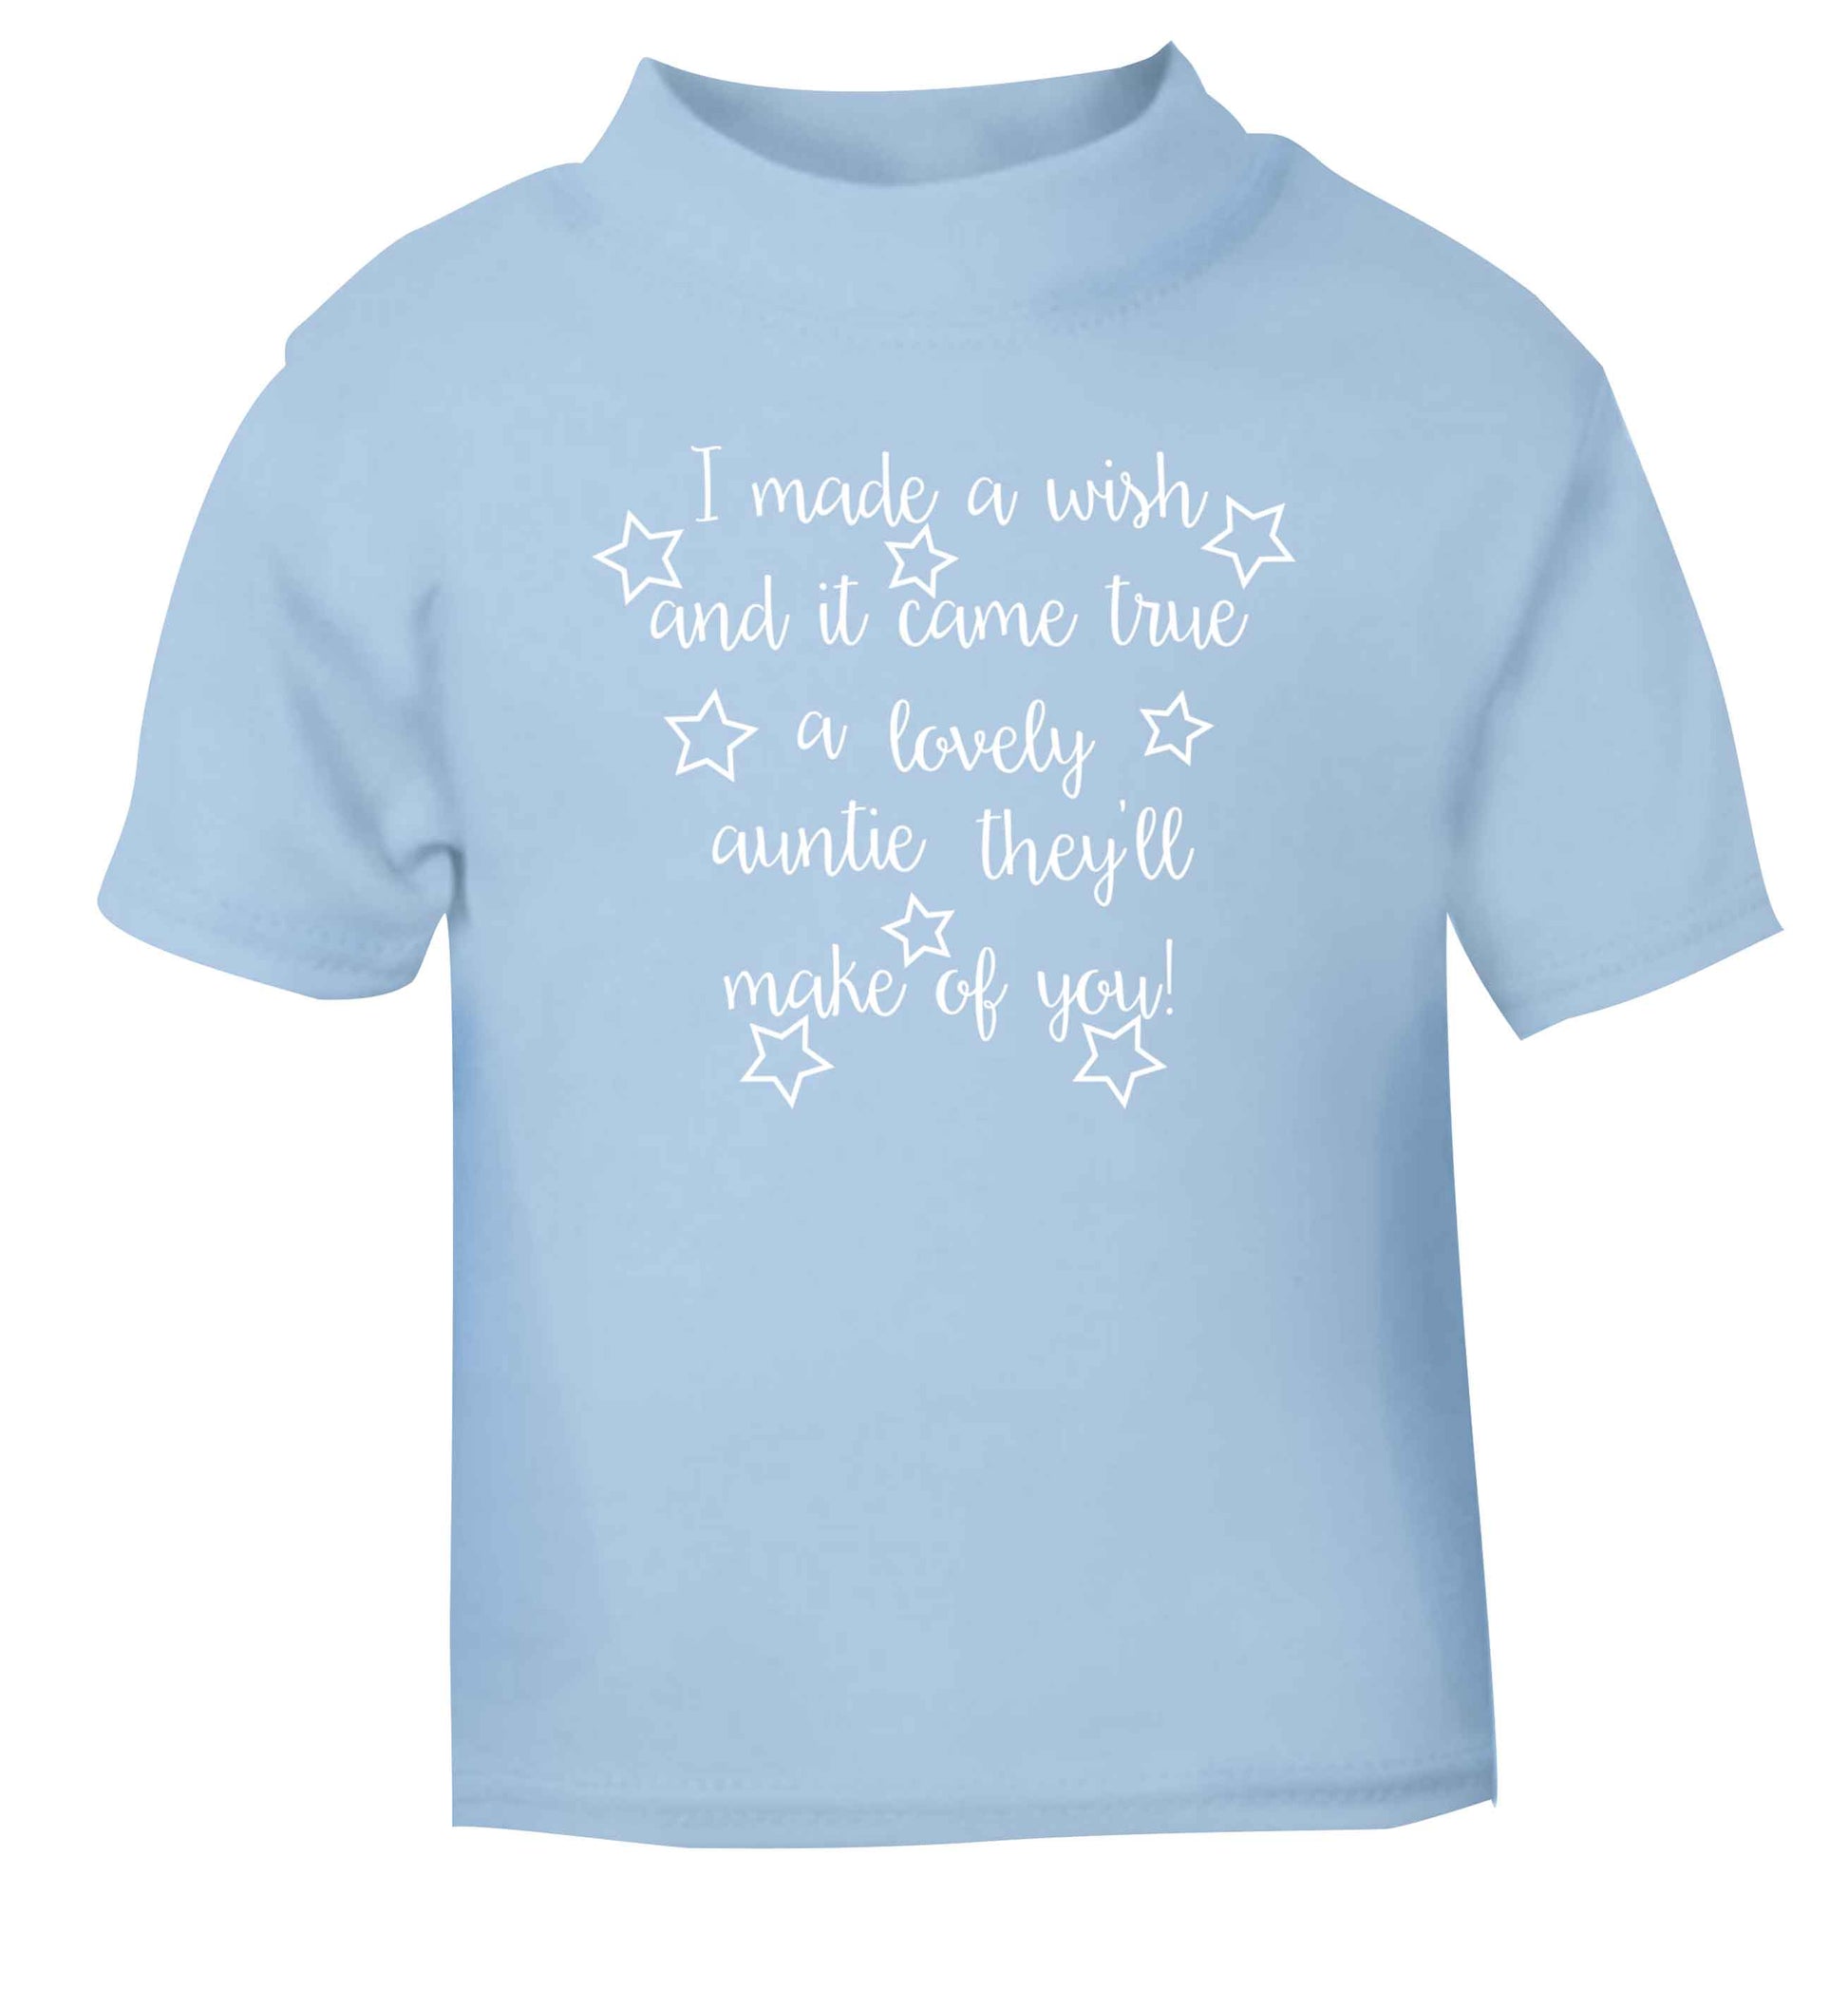 I made a wish and it came true a lovely auntie they'll make of you! light blue Baby Toddler Tshirt 2 Years